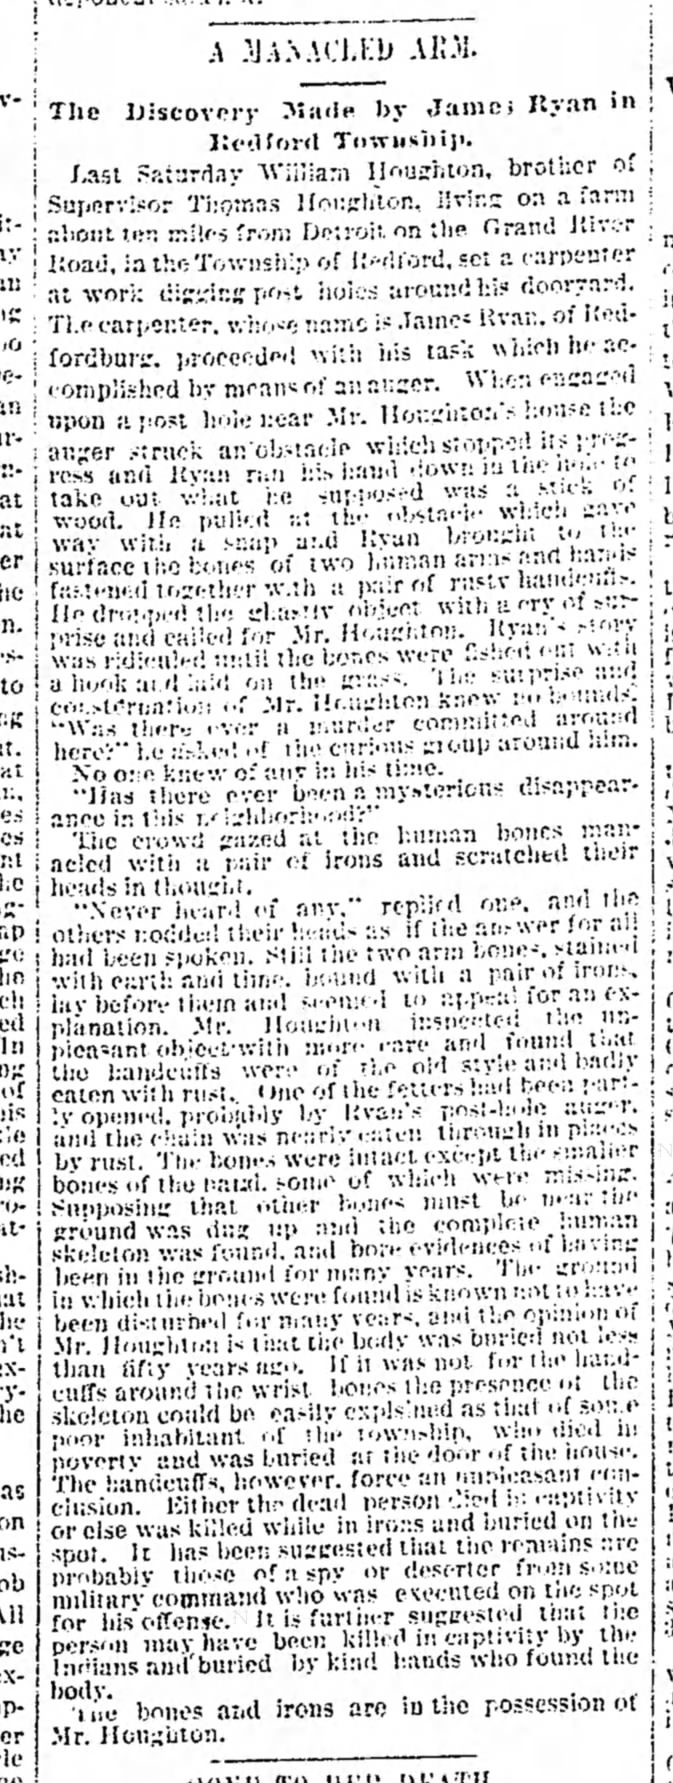 Detroit Free Press, 27 April 1889, Pg. 5 William Houghton noted